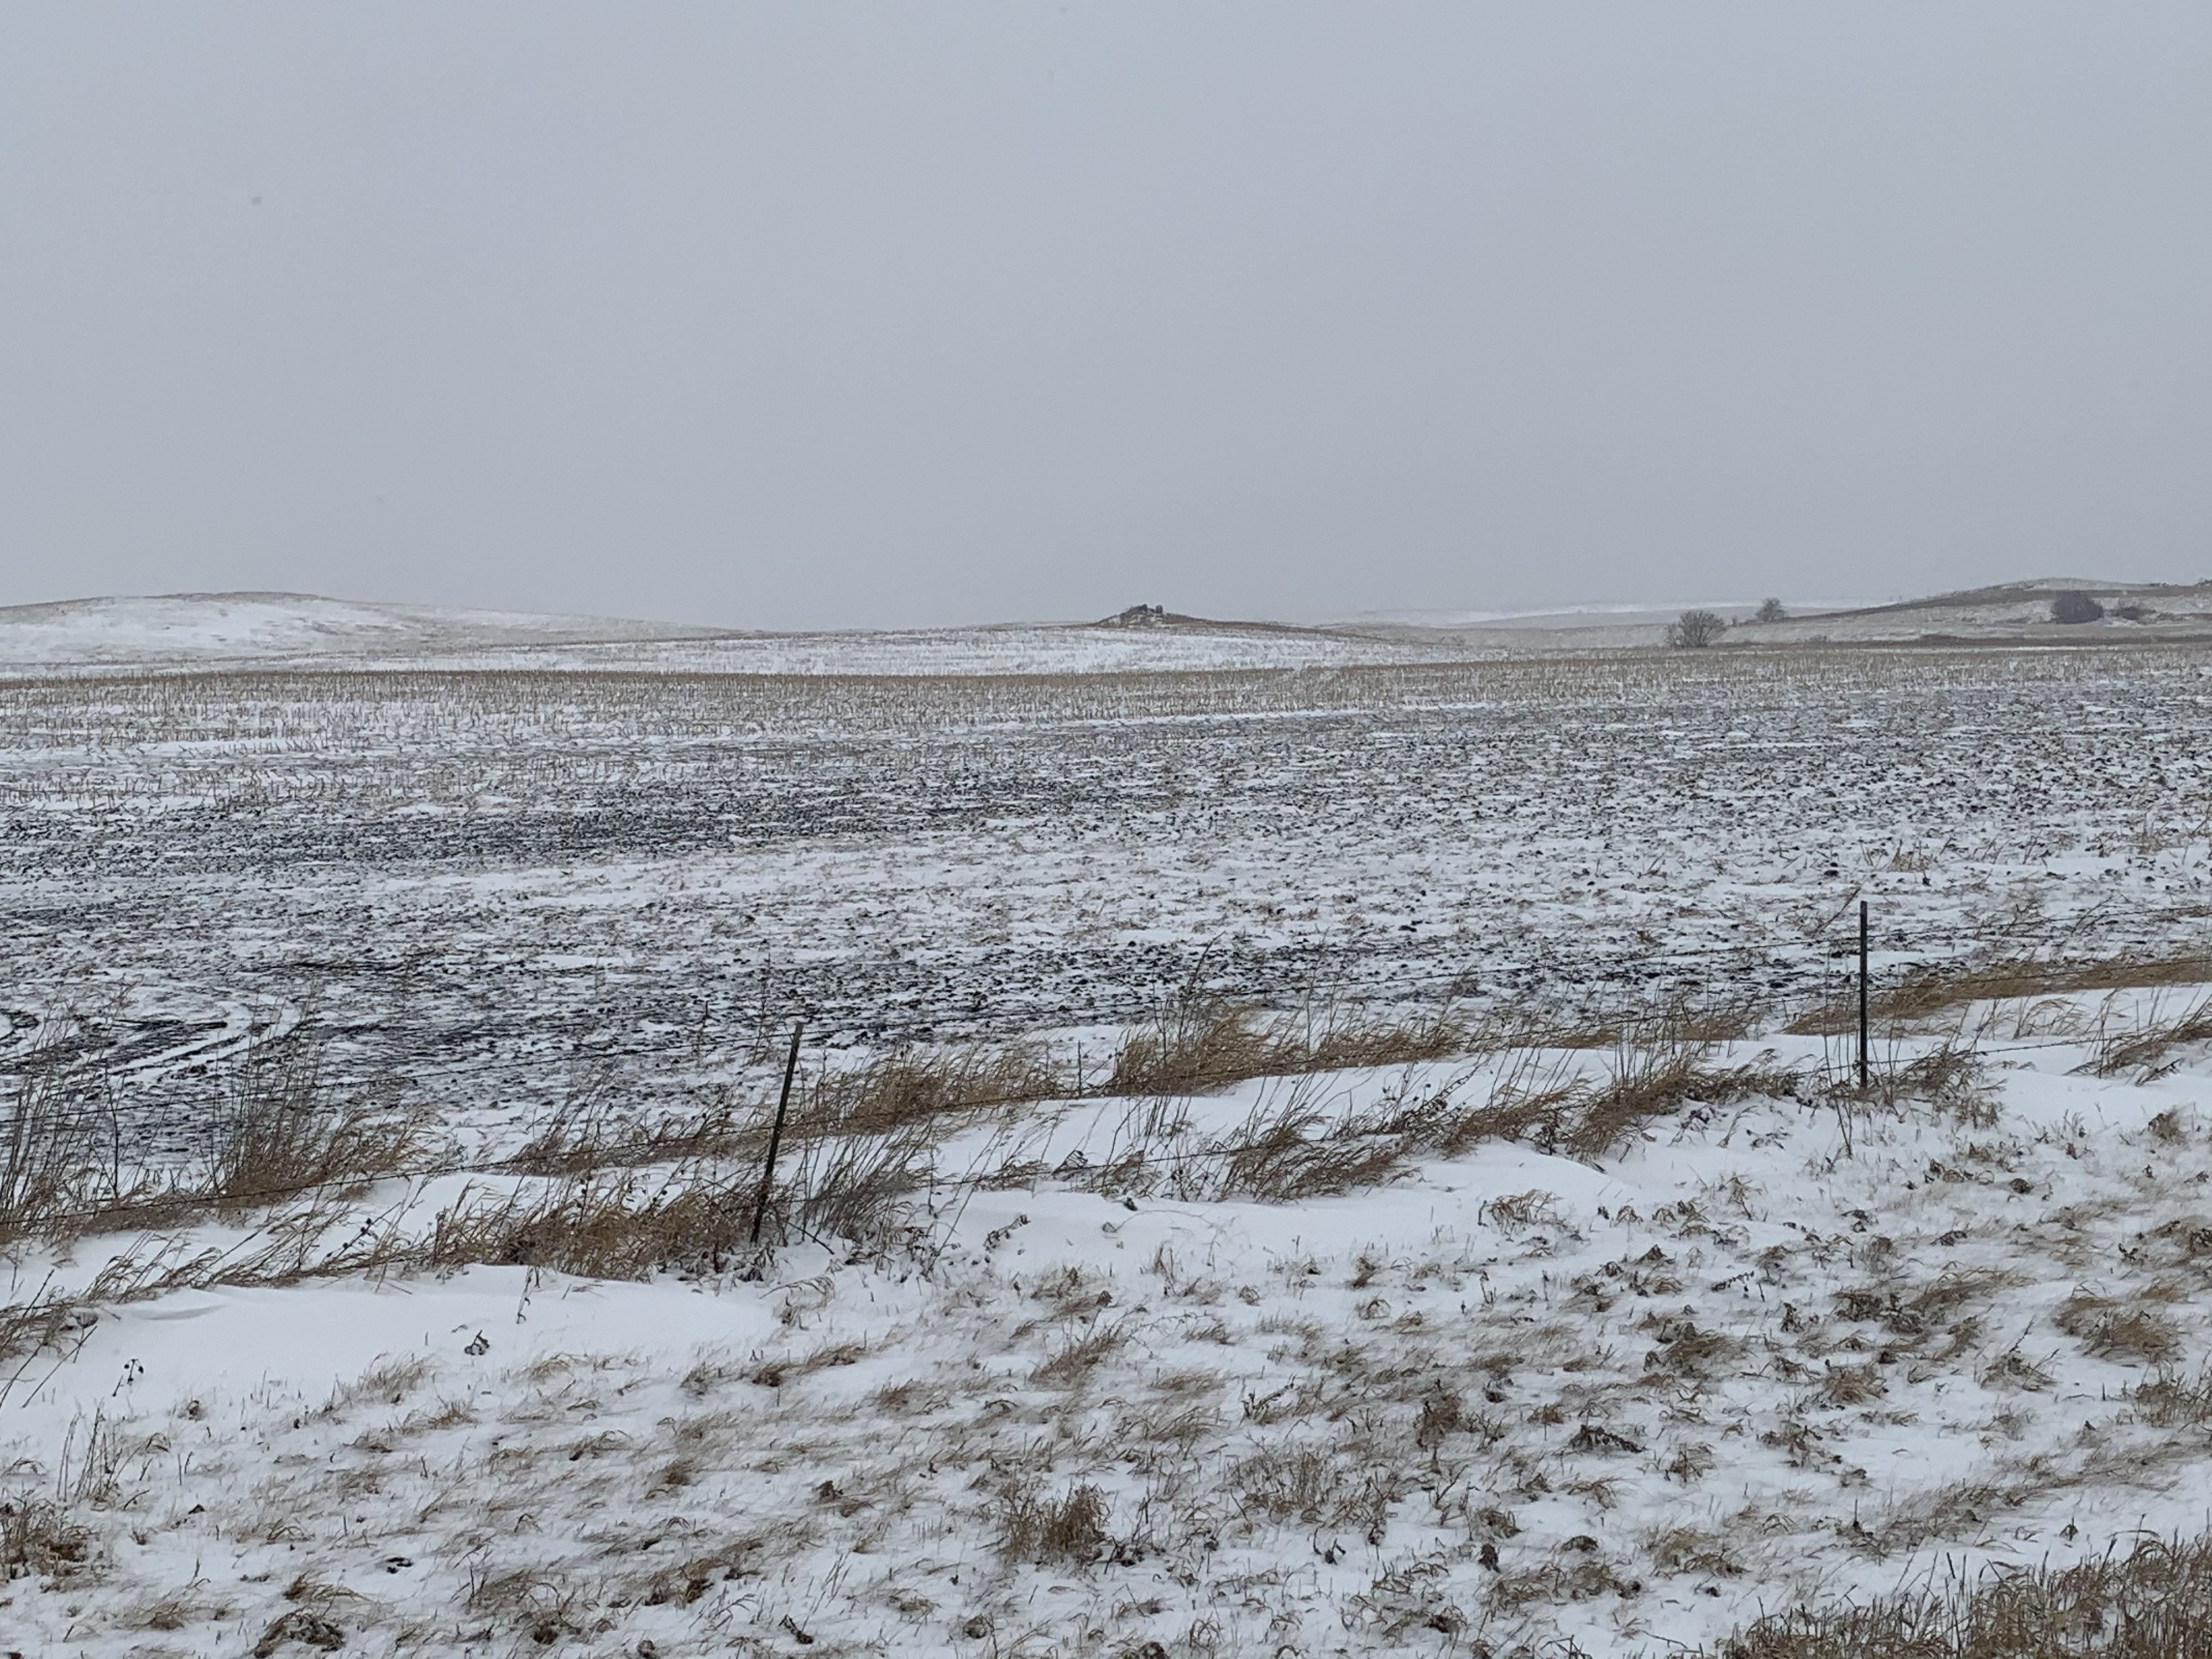 Snow and rain are a welcome sight for many farmers and ranchers